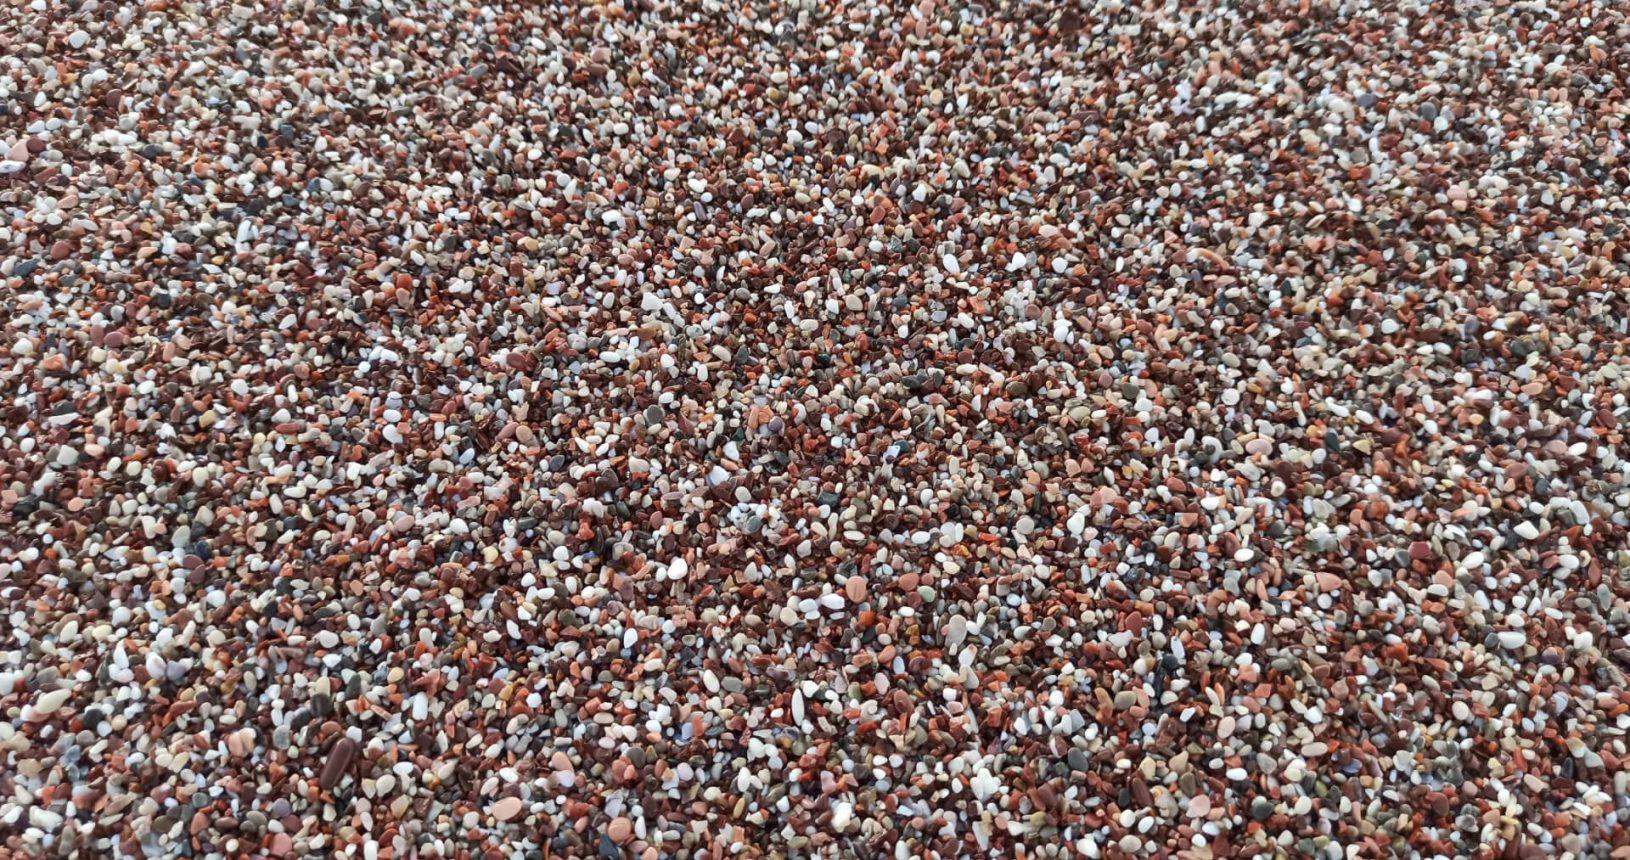 Perfect red pebble. Kings beach